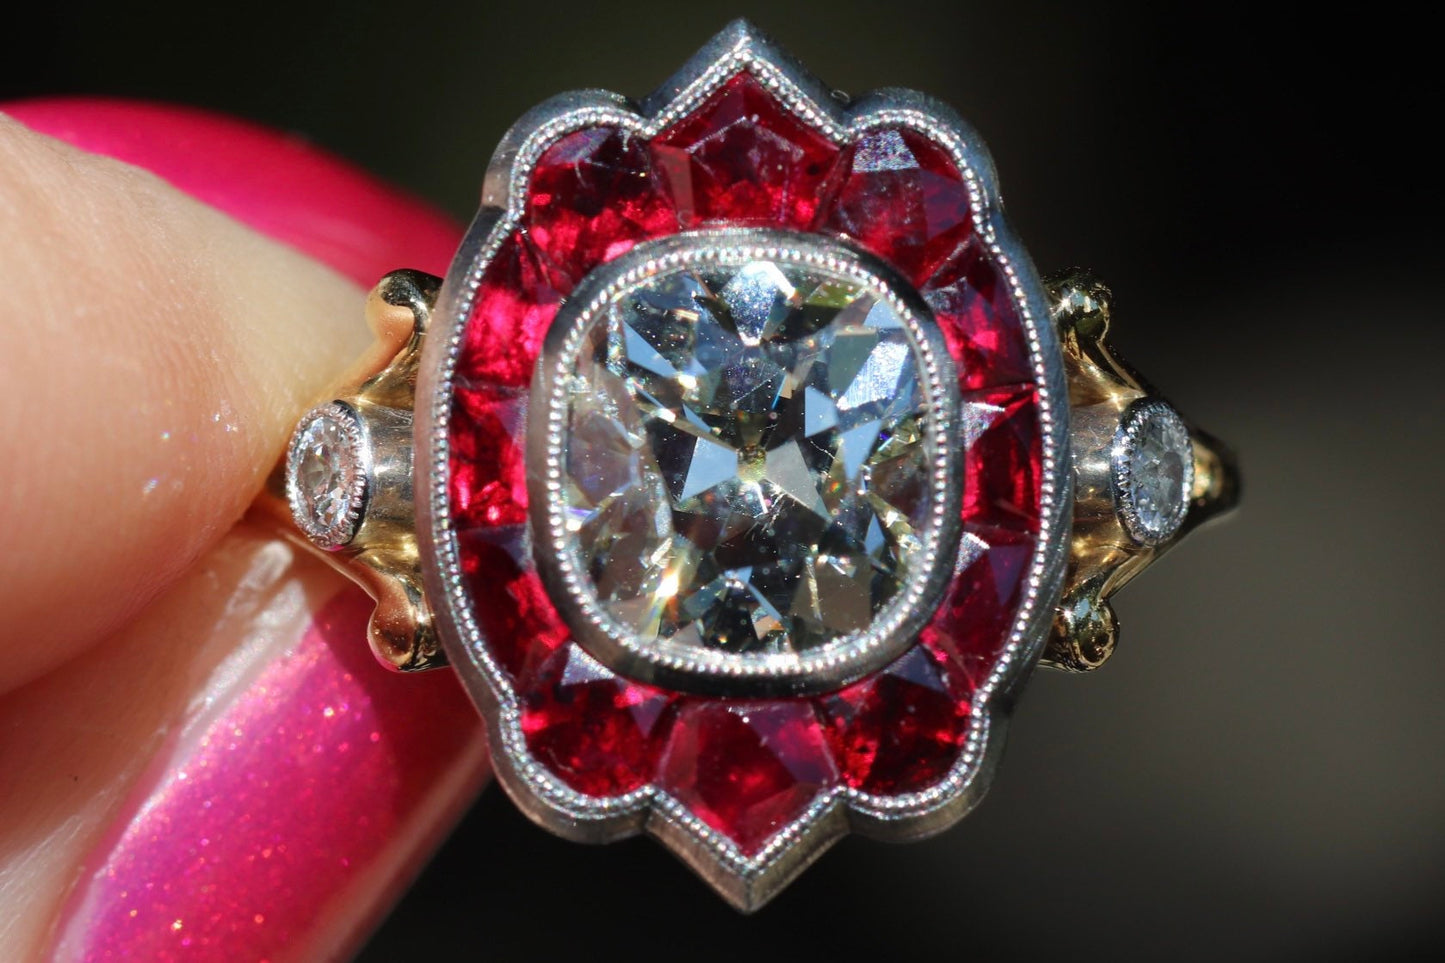 GIA certified old mine cut diamond with natural ruby halo in hand forged customs ring